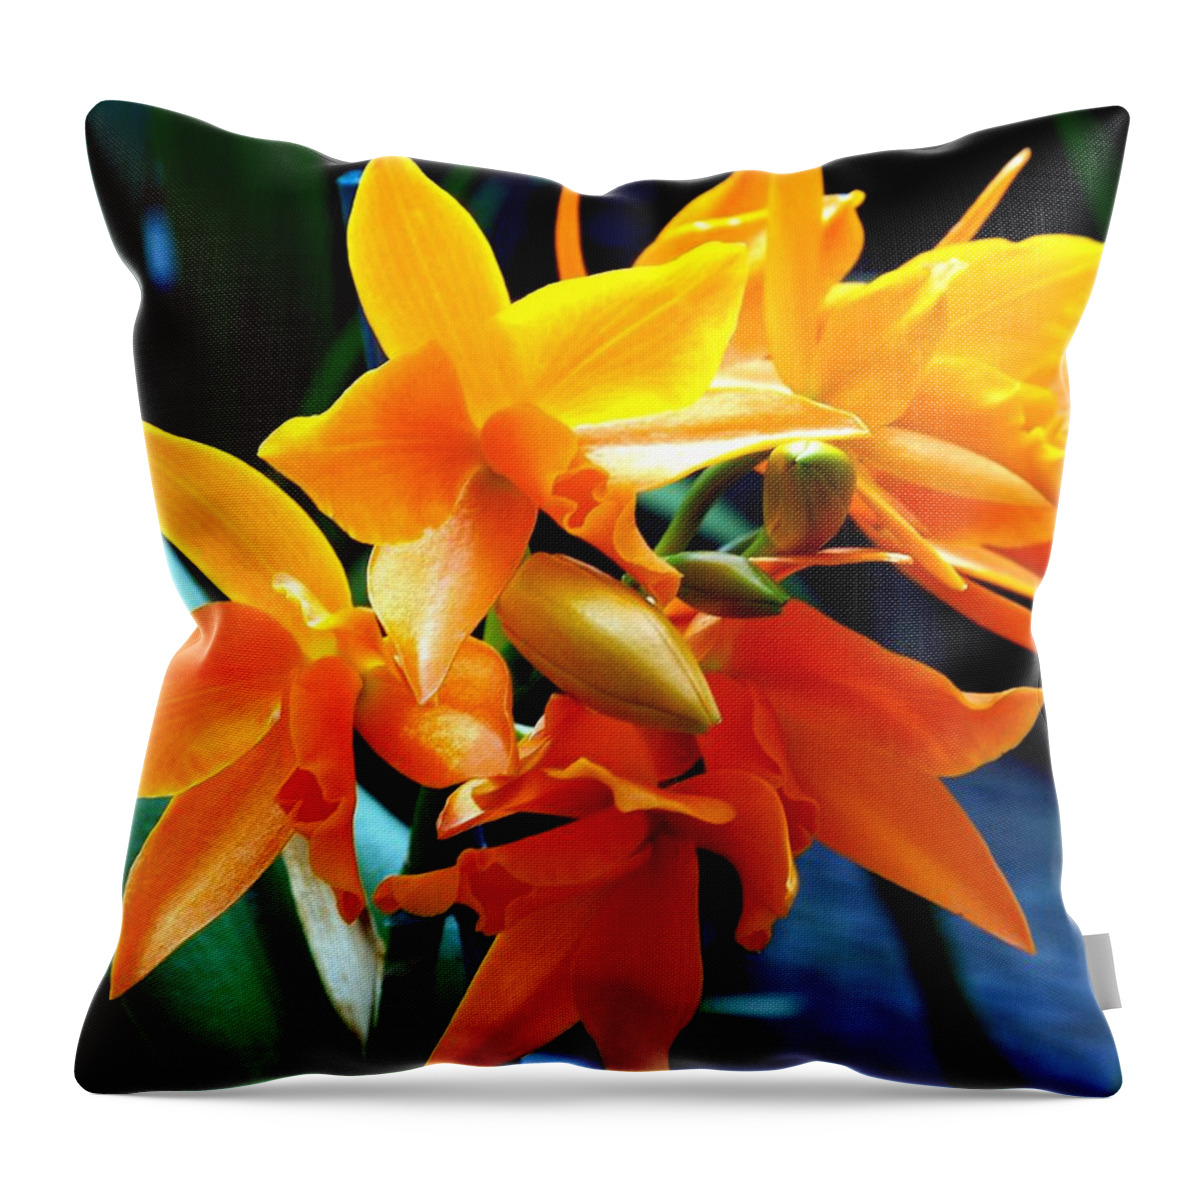 Flowers Throw Pillow featuring the photograph Exotic Orange by Karen Wiles